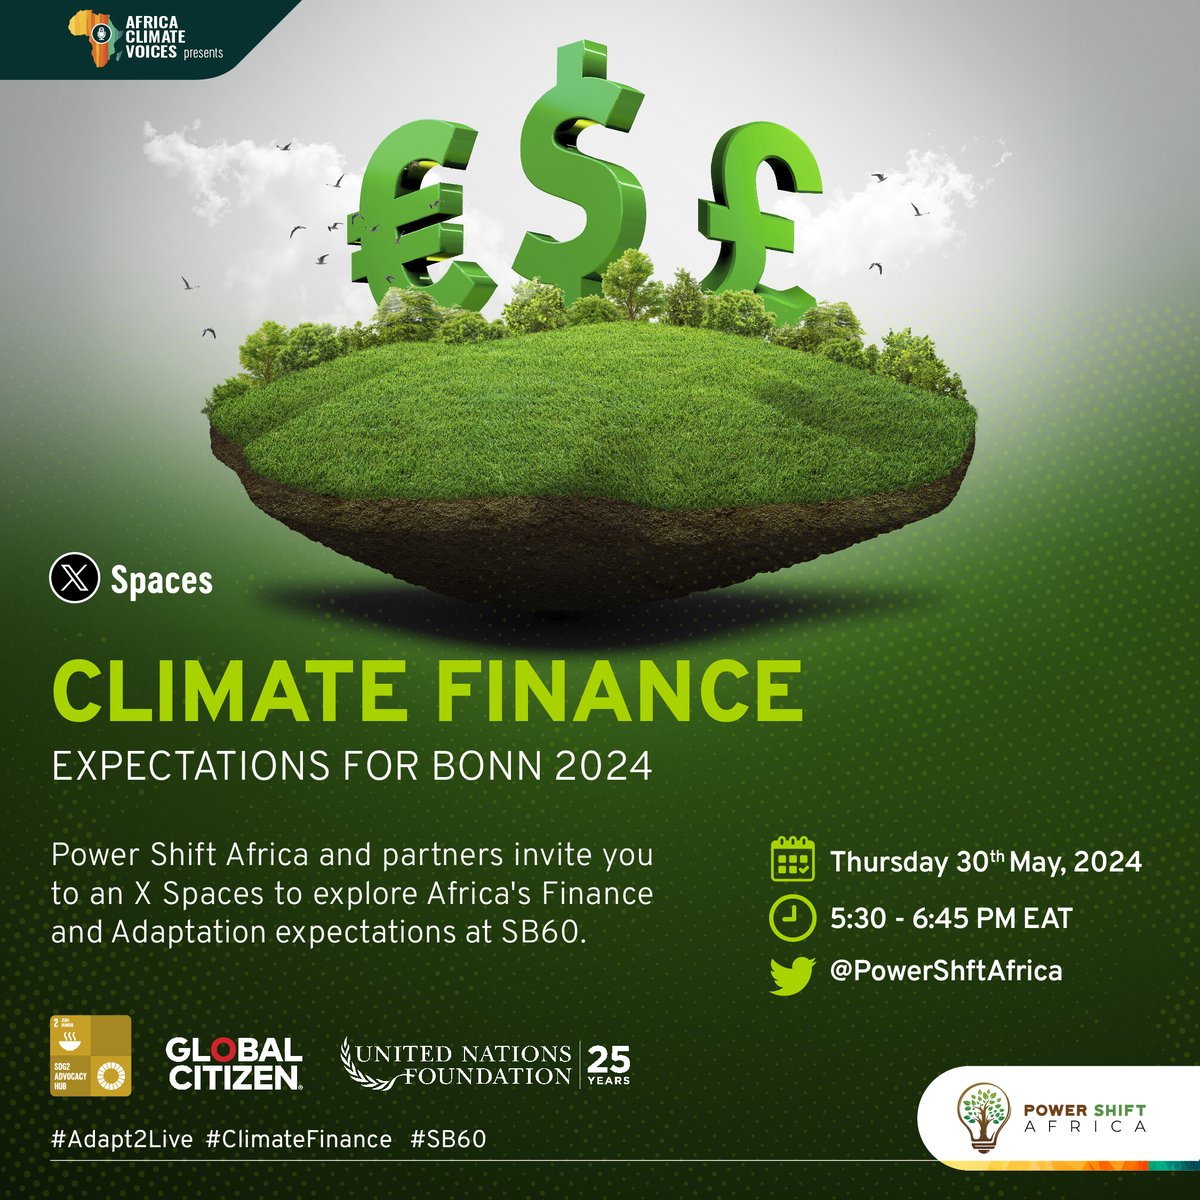 Save the Date📌 The eyes of the world are on Bonn, Germany, as SB60 gets underway next week. Top on the agenda is Finance! Will Bonn set the stage for a successful year for finance 💰? Join Power Shift Africa & partners this Thursday, May 30 at 5:30 PM EAT for an exciting X